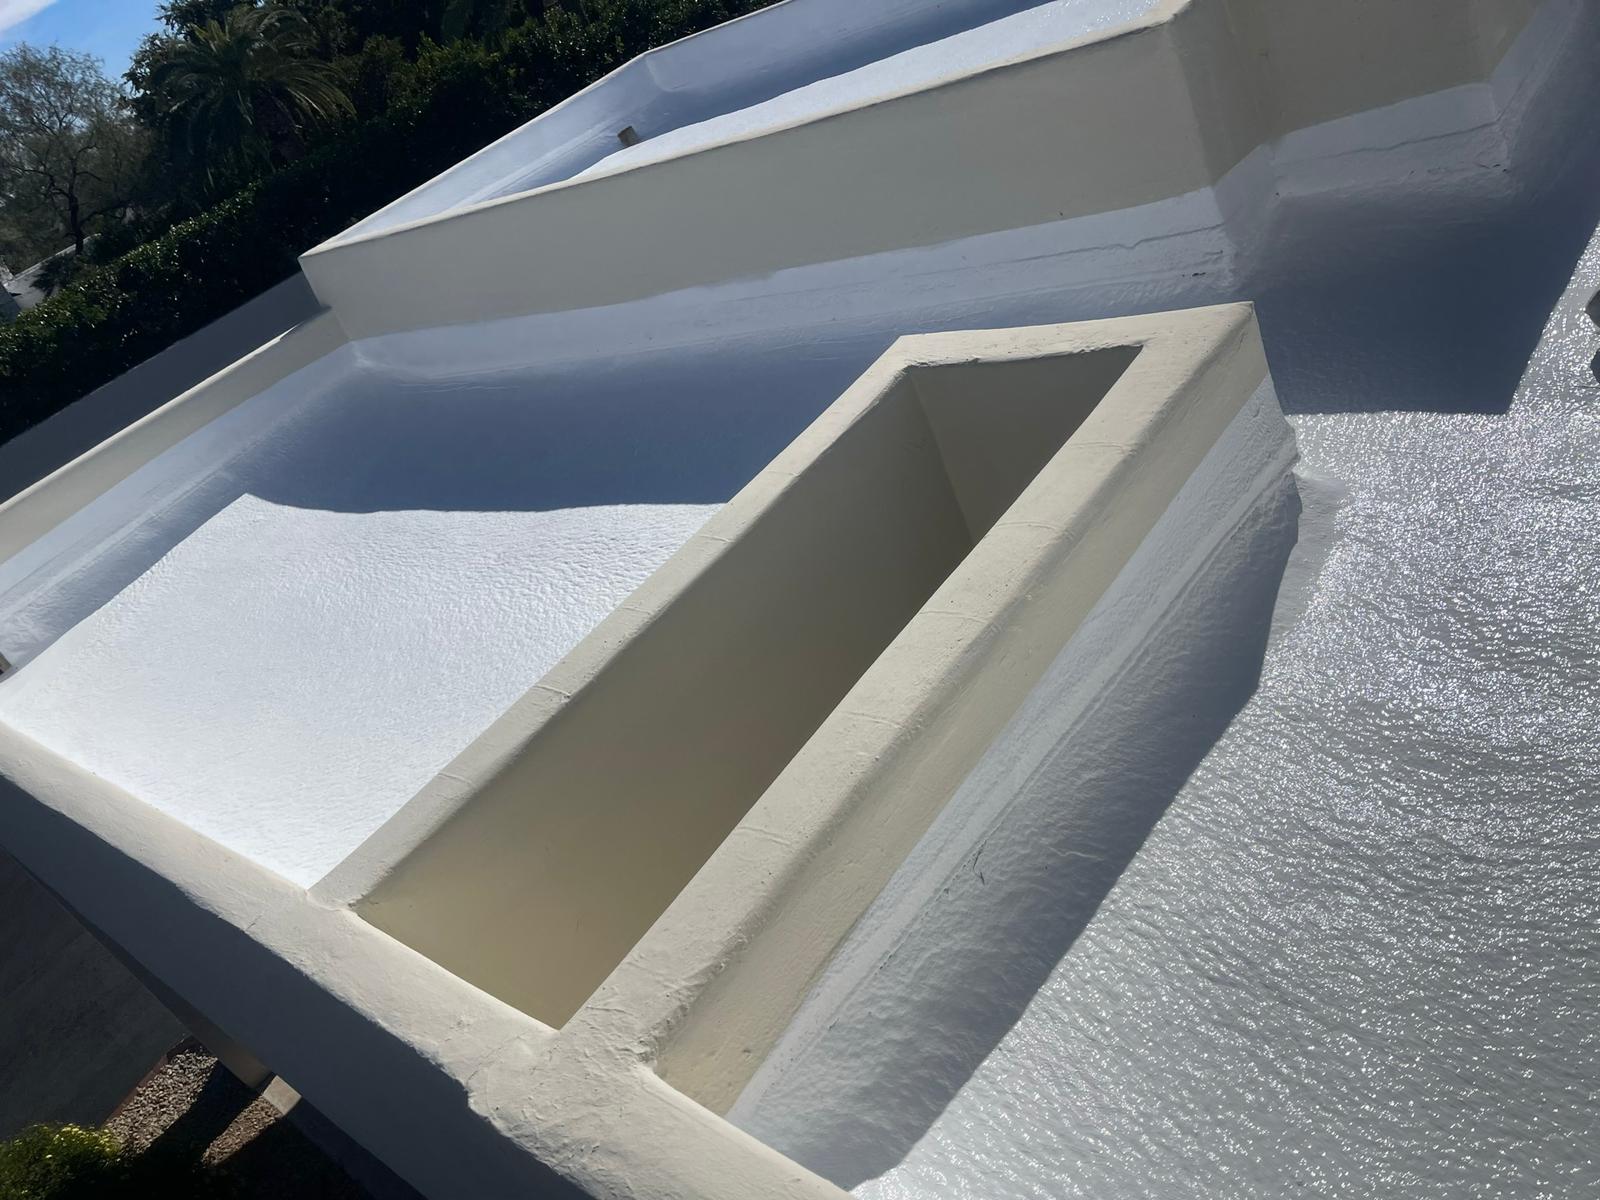 Perfectly coated corners and edges of a Gilbert roof.